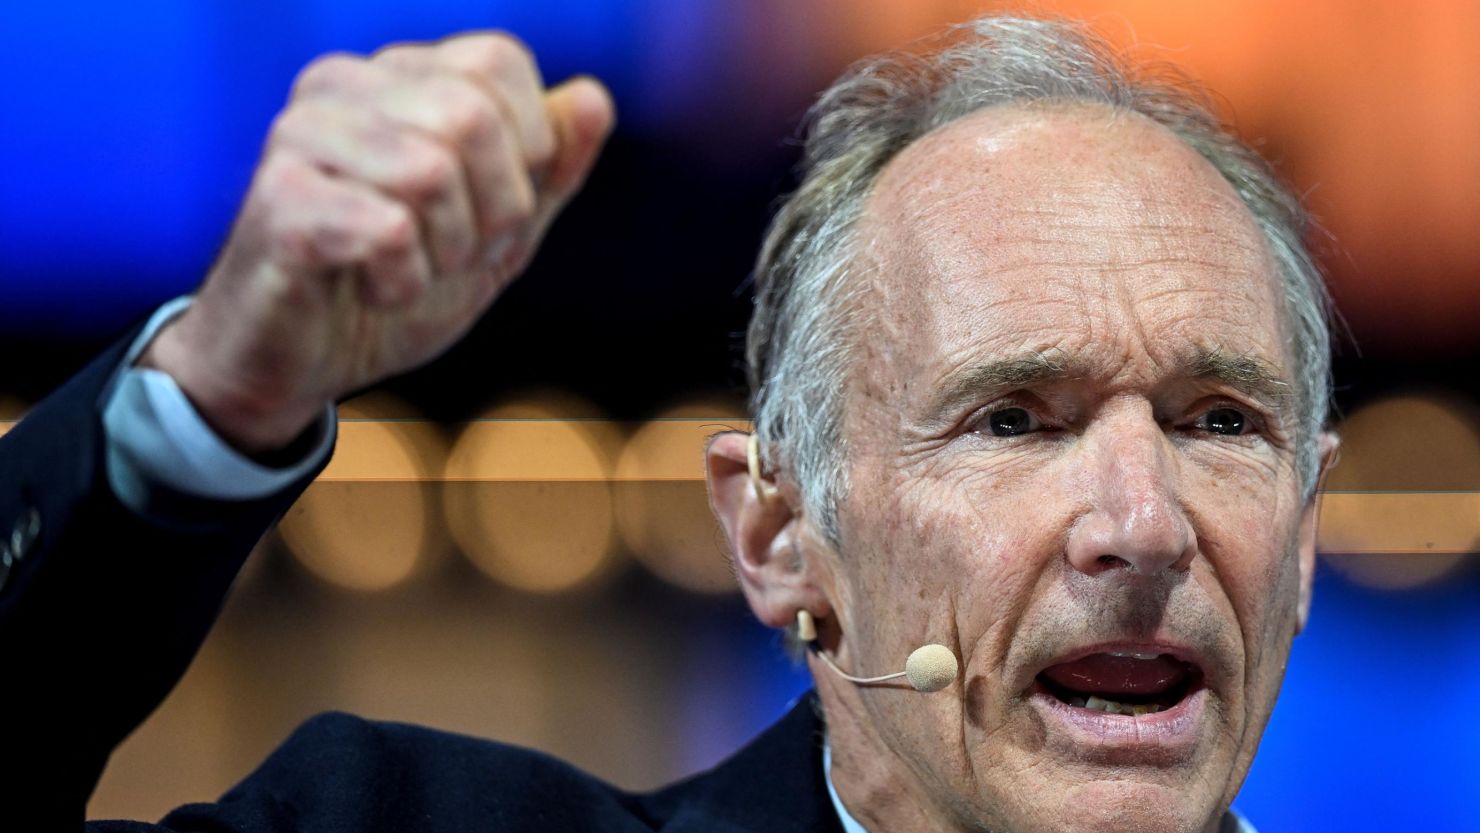 TIM BERNERS-LEE, THE MAN WHO CREATED THE WORLD WIDE WEB, HAS SOME REGRETS